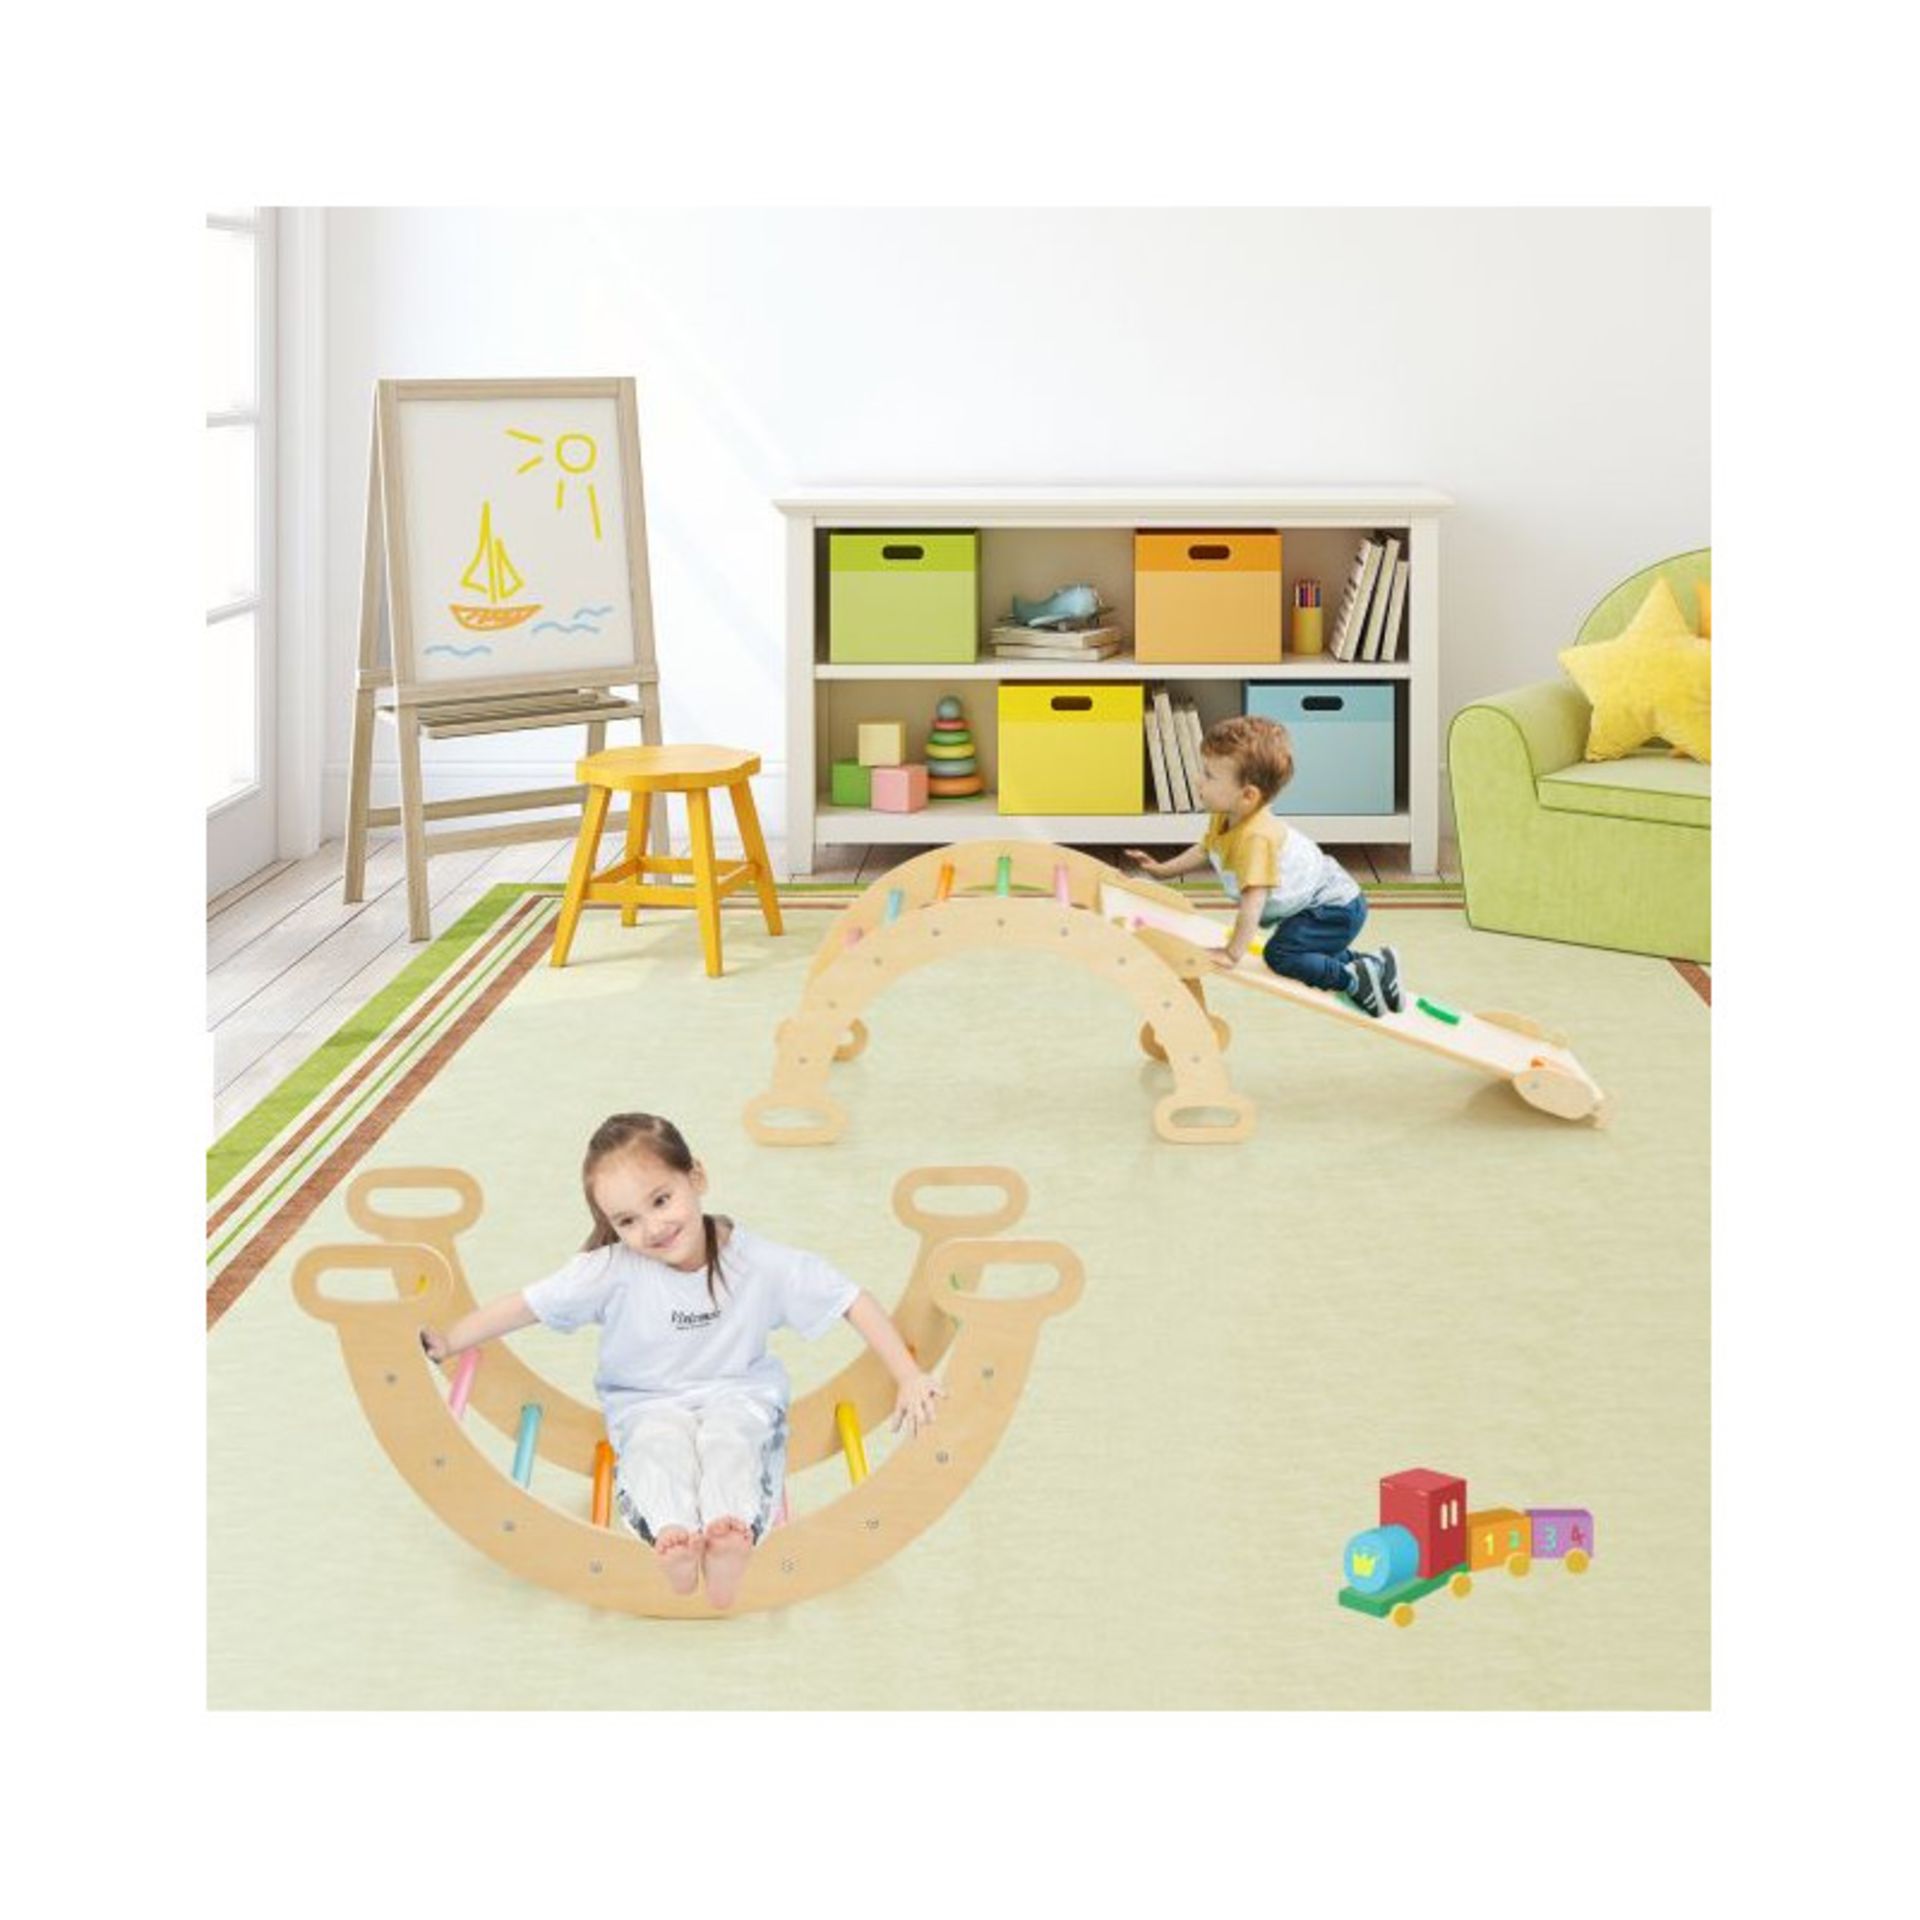 TRIANGLE CLIMBING TOYS WITH CLIMBING TRIANGLE ARCH RAMP FOR 1+ YEARS OLD. - R14.11.